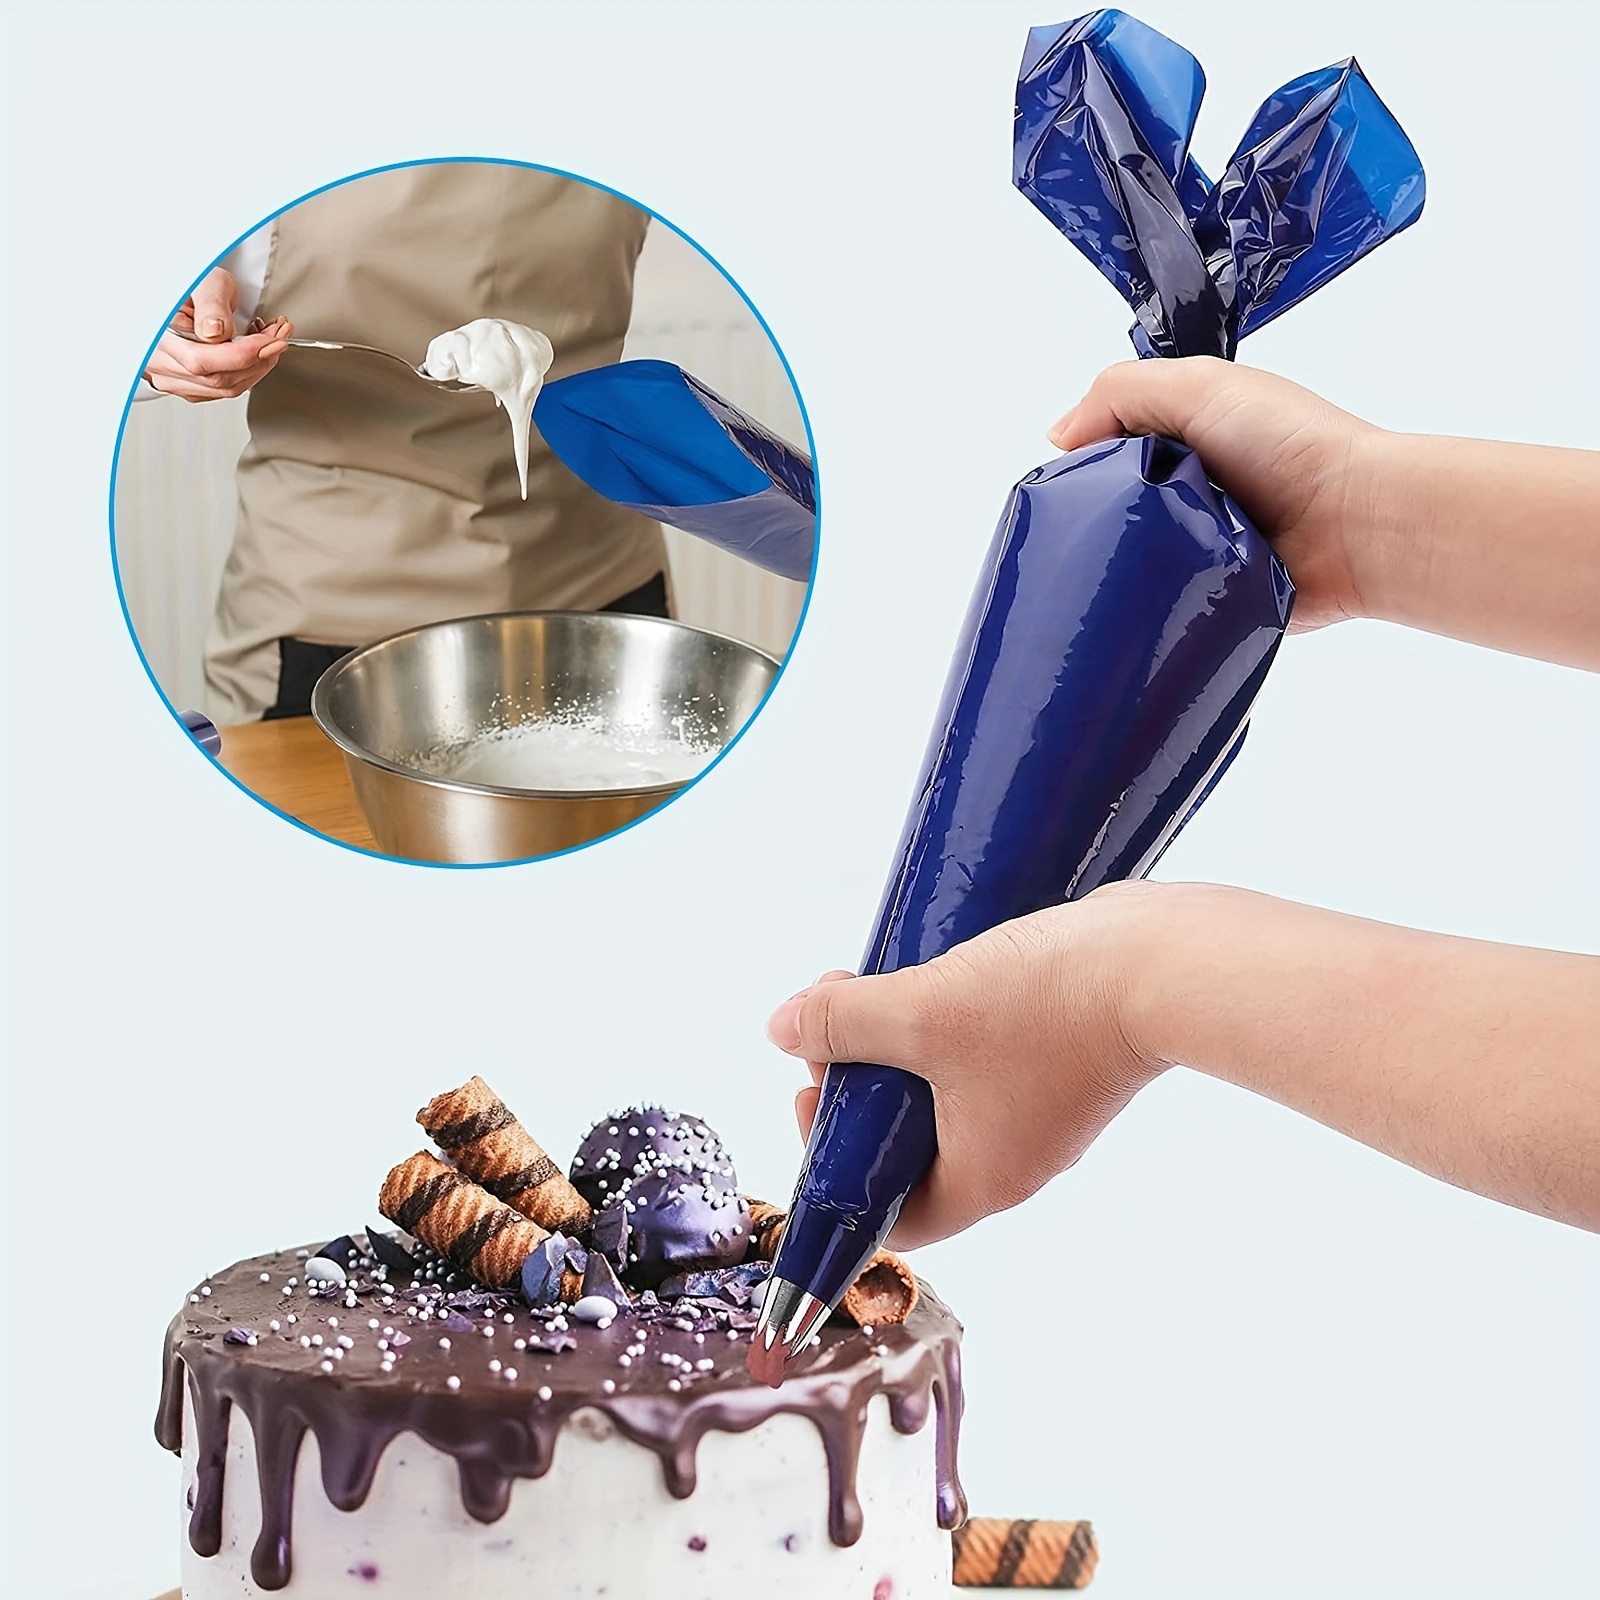 1 Roll Polythene Roll Cream Squeezing Piping Bags, Cake Decoration Bag